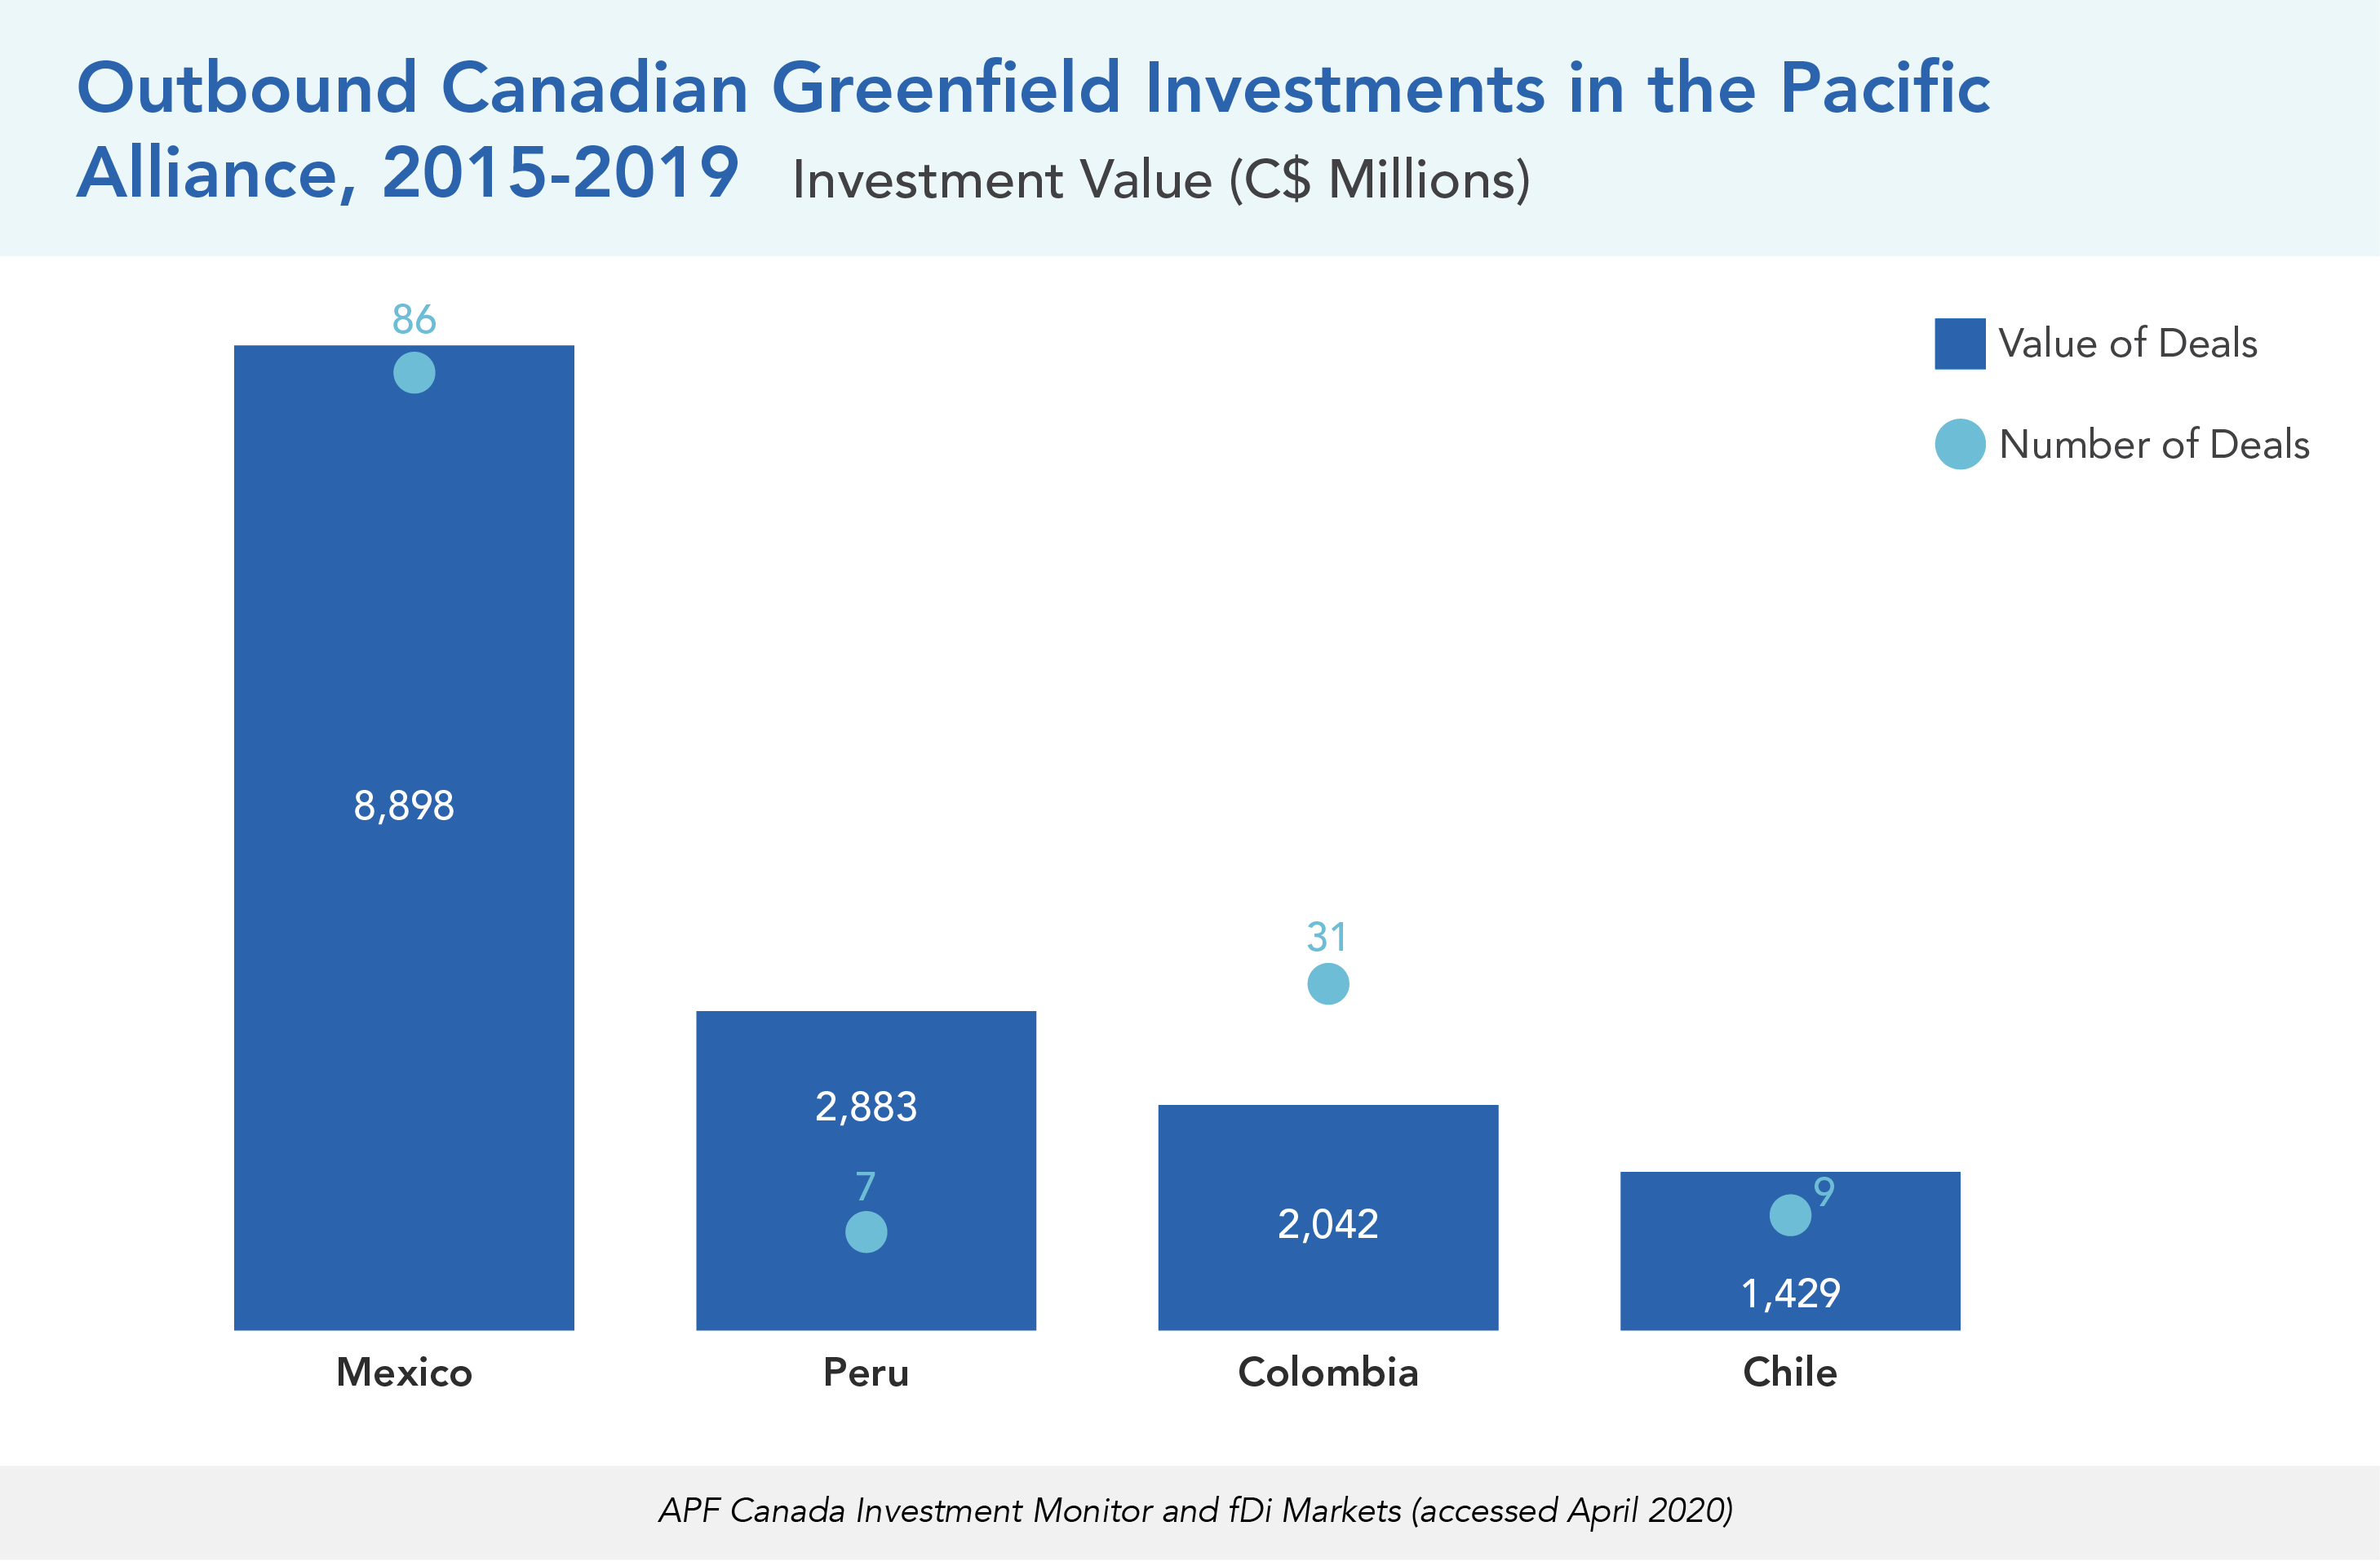 Outbound Canadian Greenfield Investments in the Pacific Alliance, 2015-2019